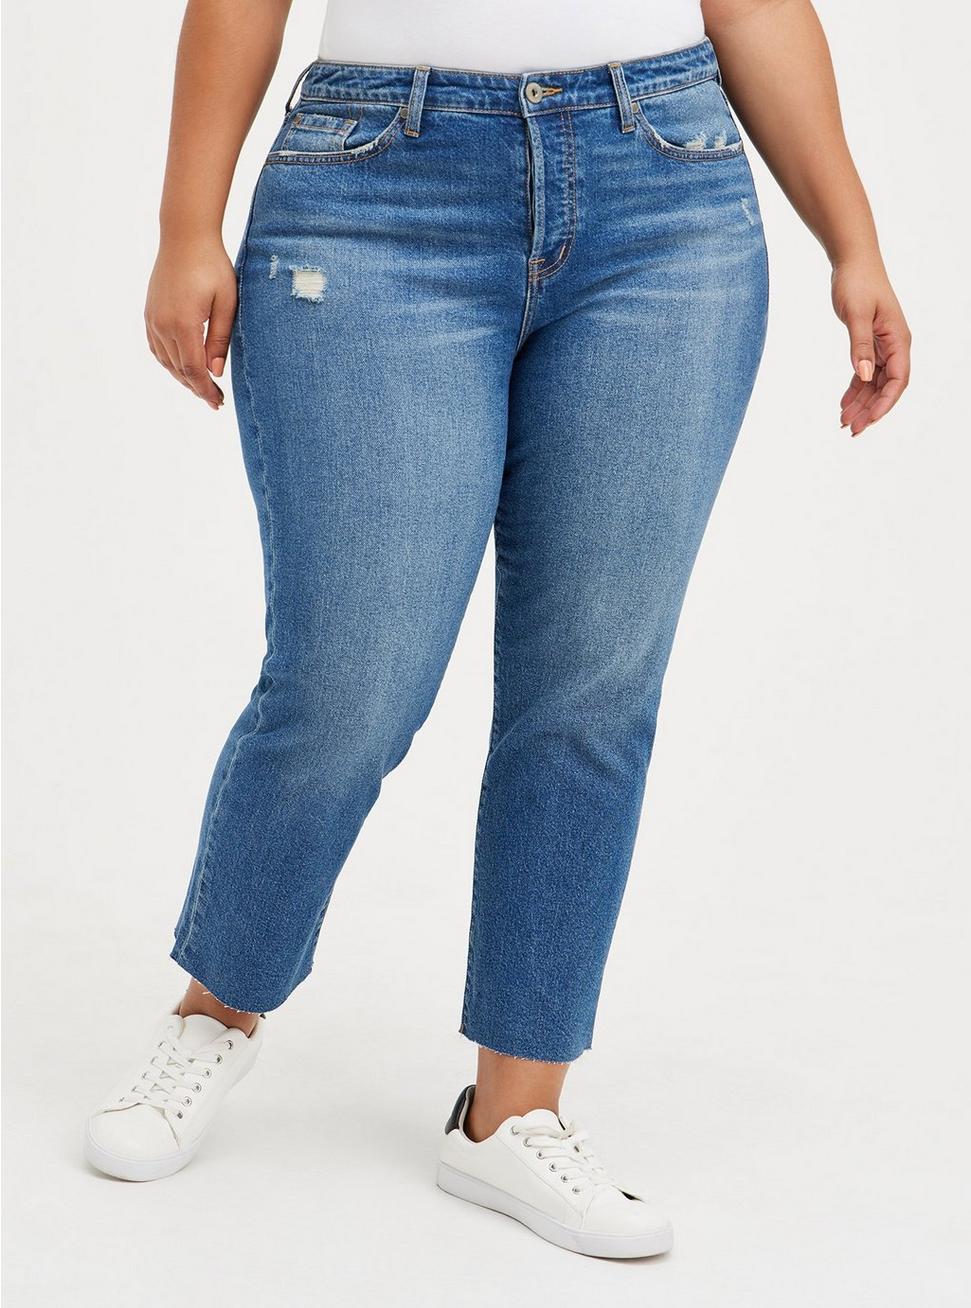 Stovepipe Straight Classic Denim High-Rise Jean, , hi-res